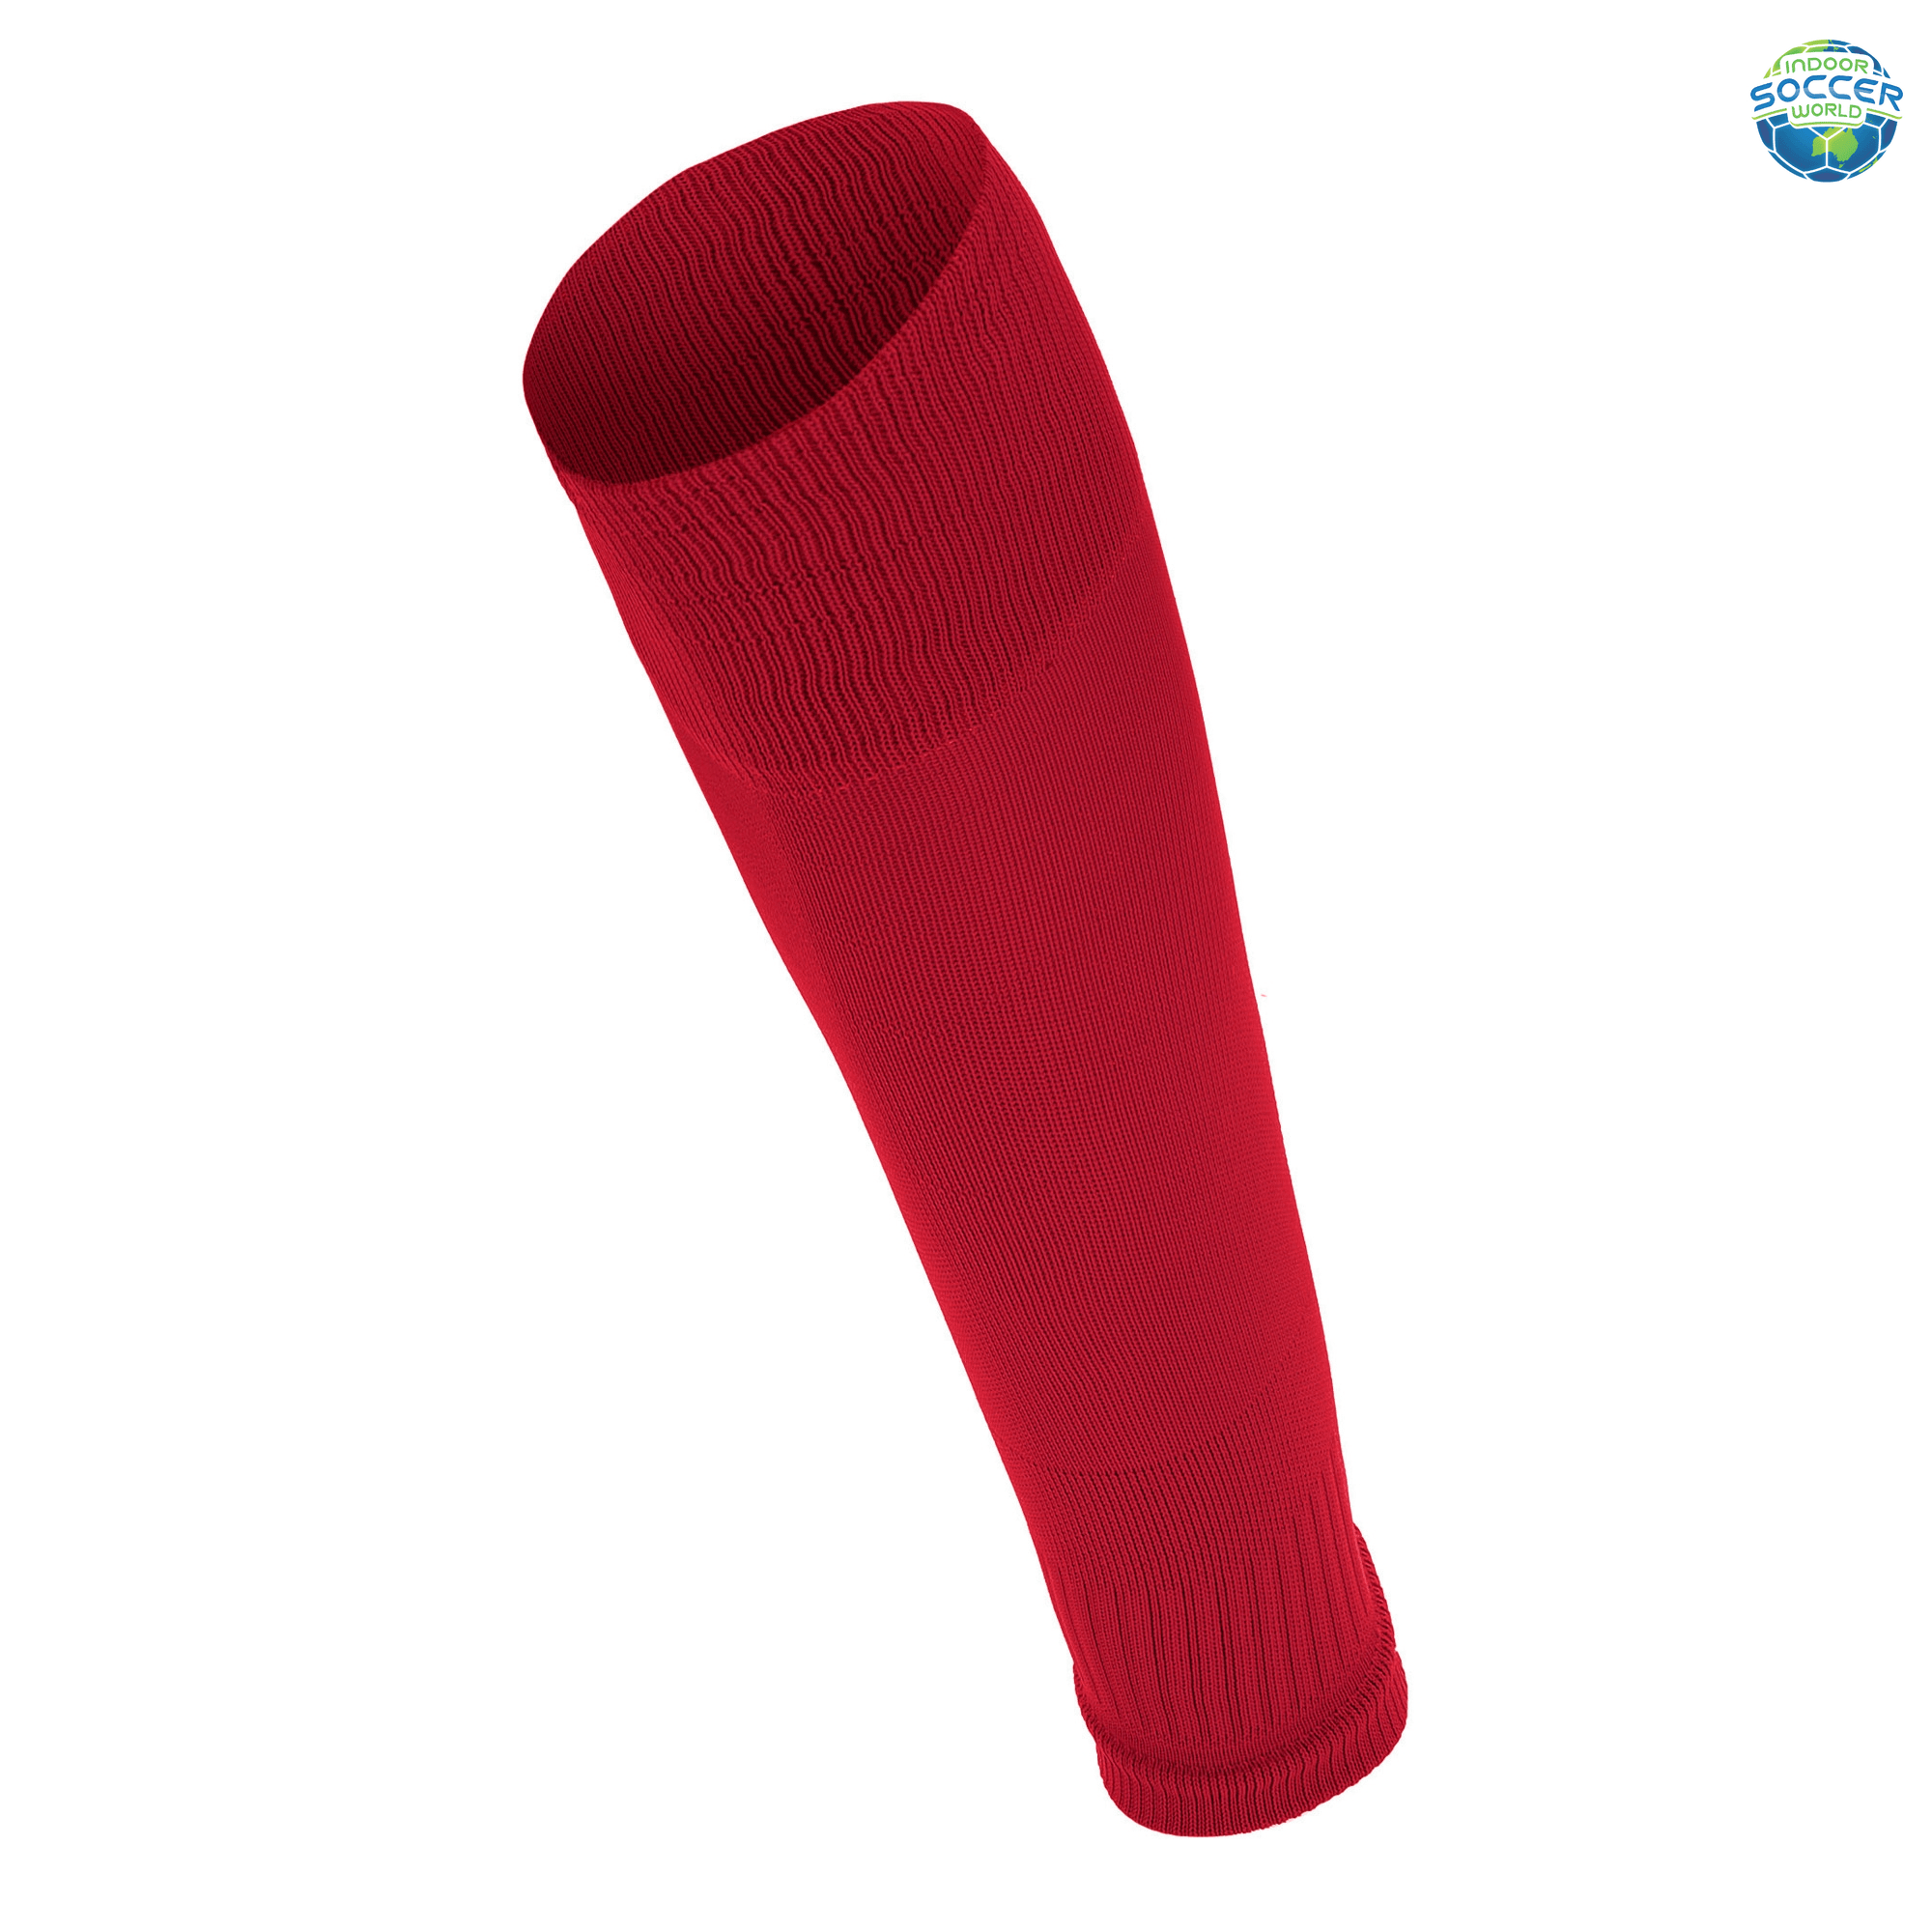 ISW SPRINT FOOTLESS SOCKS RED